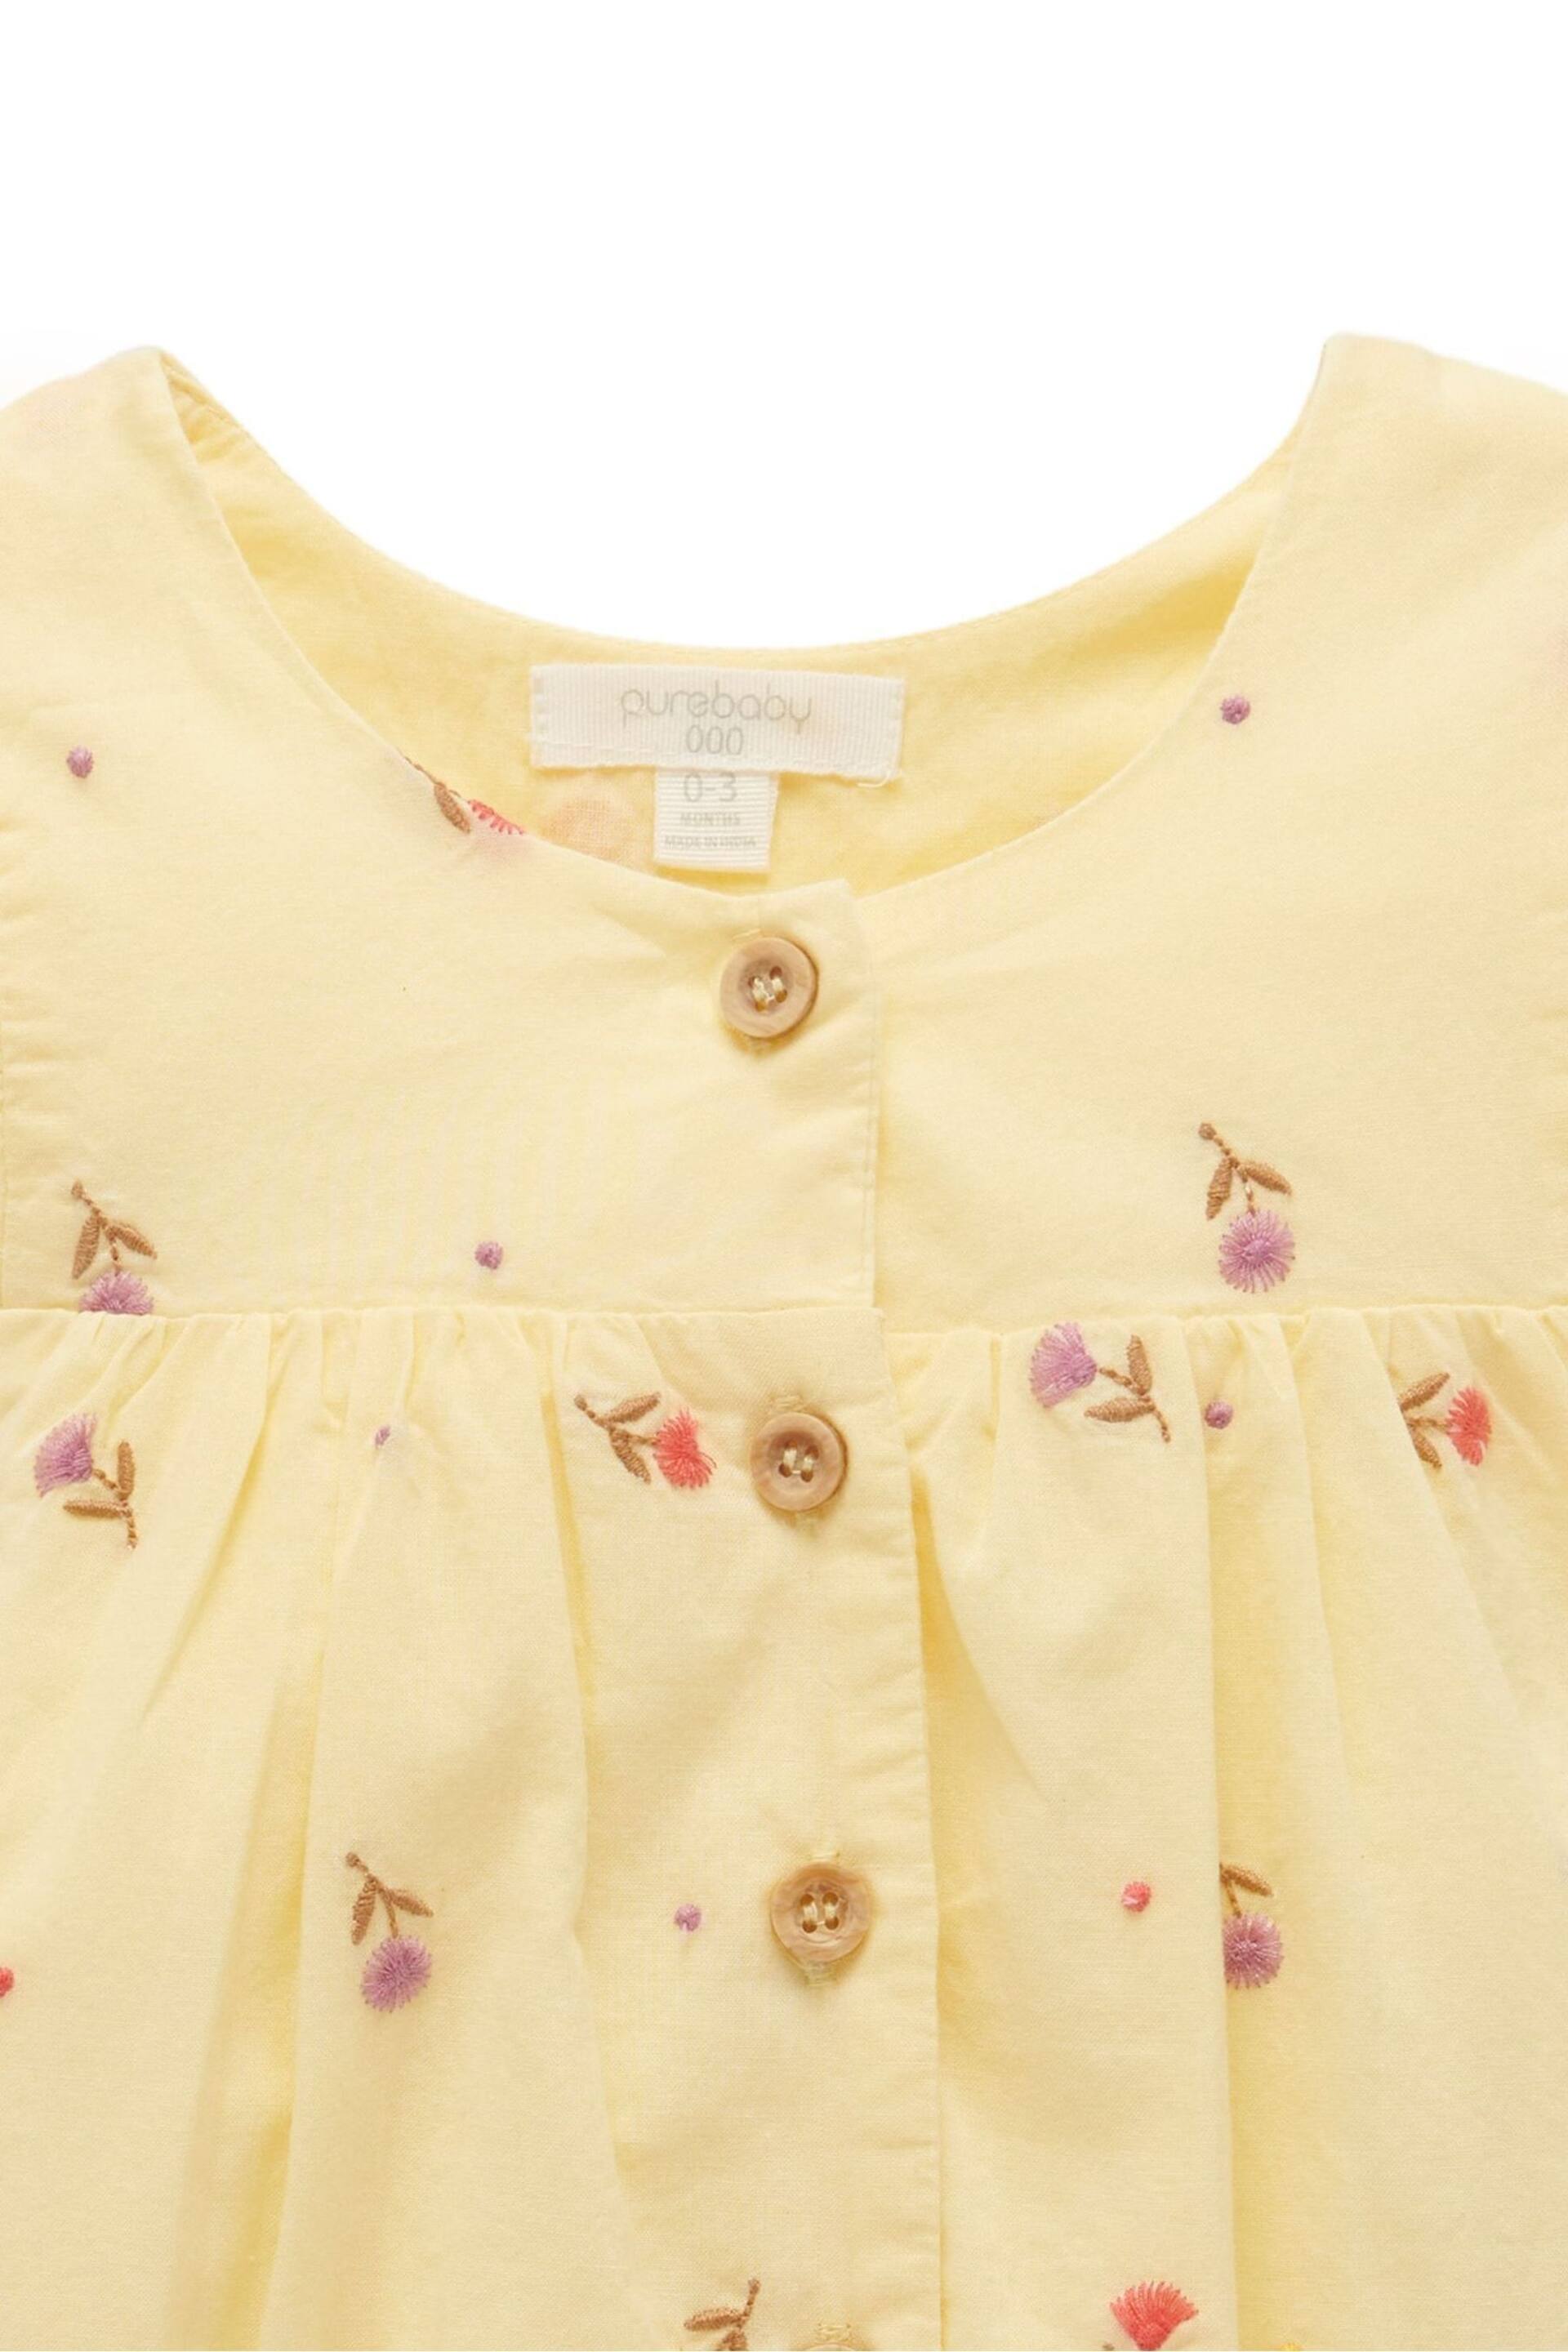 Purebaby Yellow Embroidered Romper - Image 4 of 4